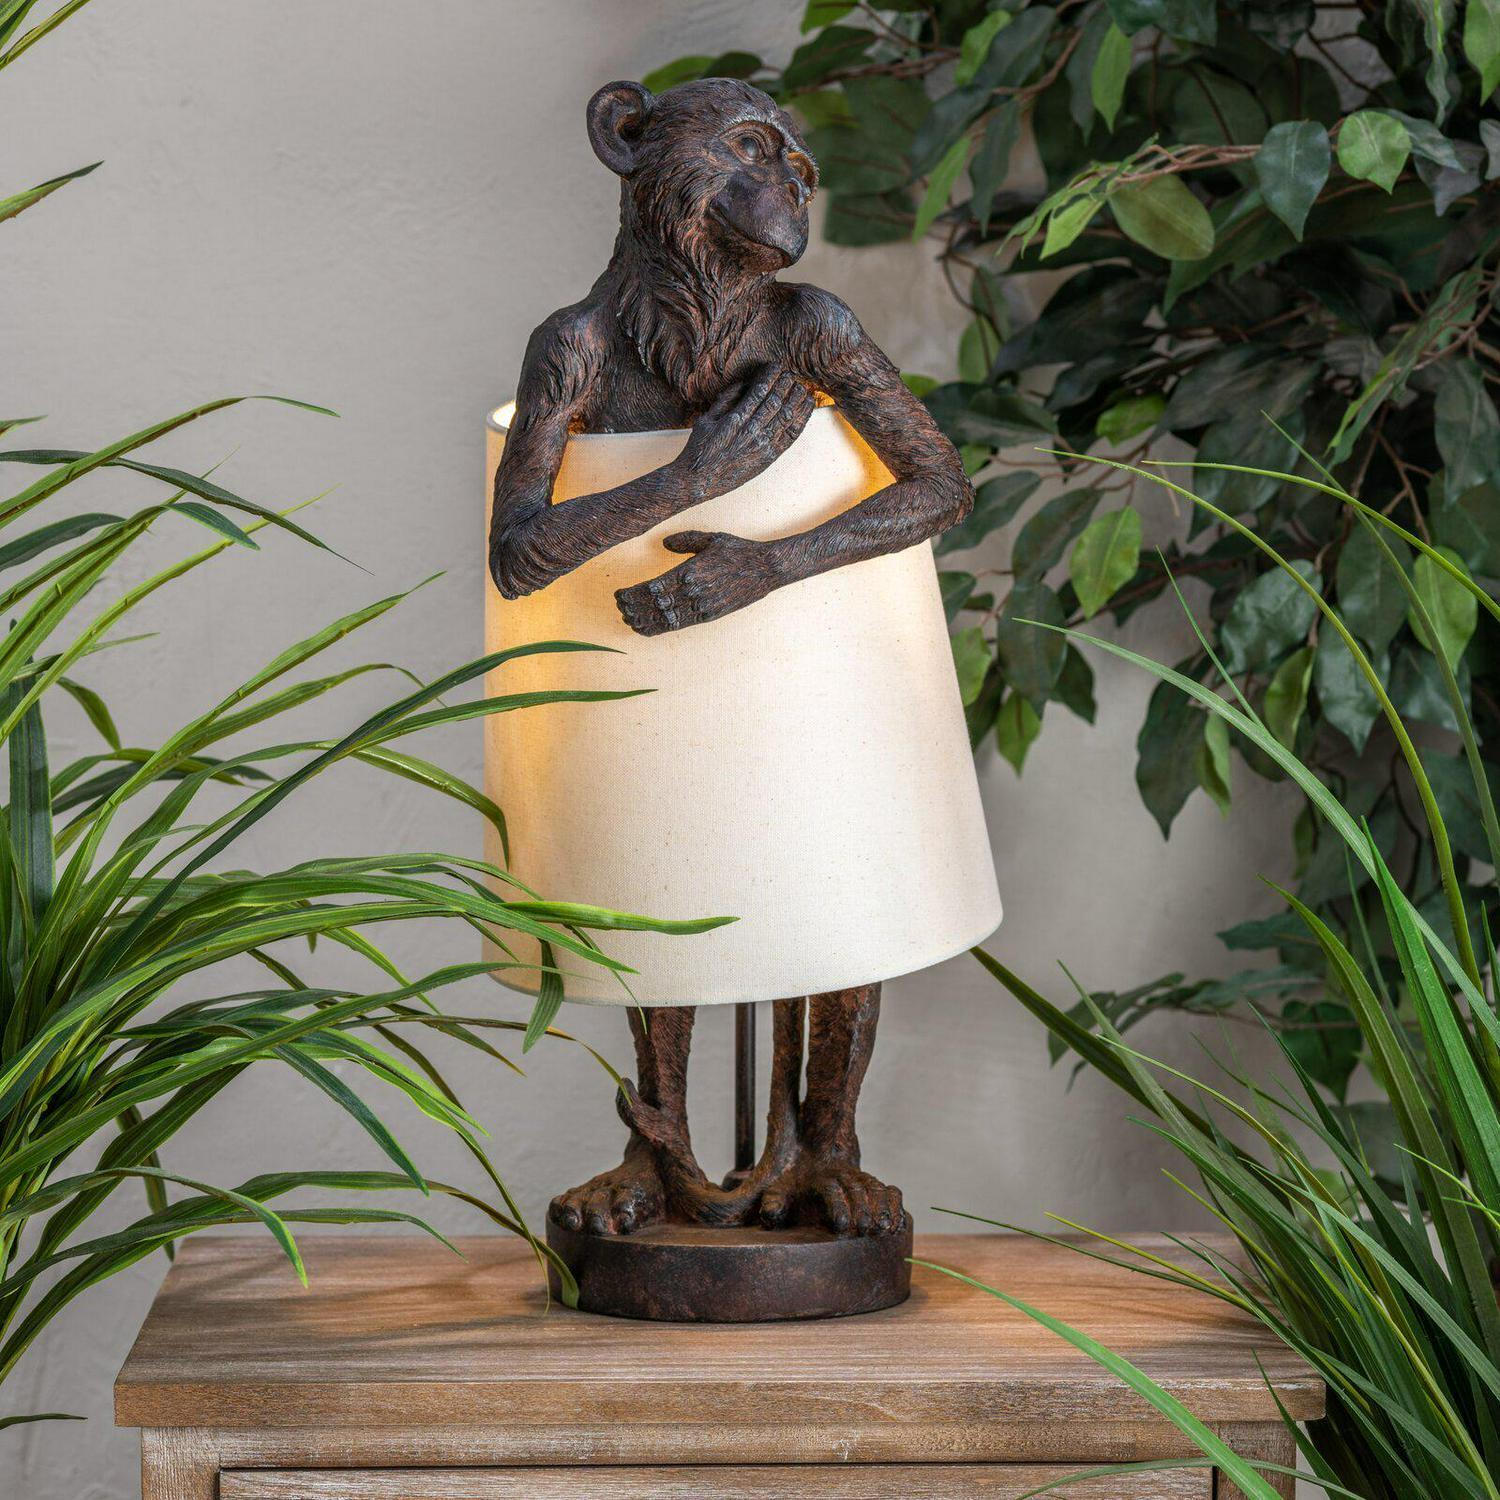 Cute Modest Monkey Sculptural Table Lamp Fun Whimsical Accent Lighted Statue